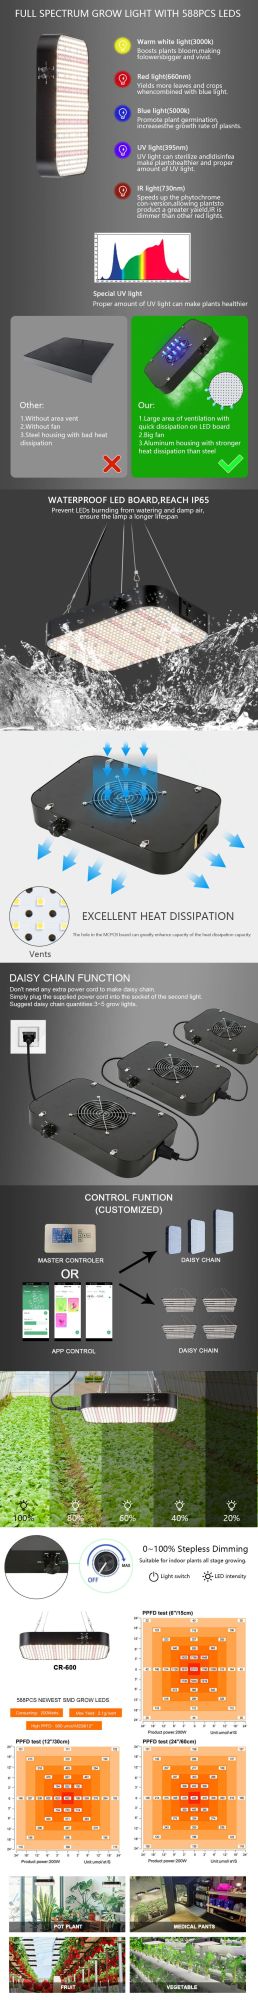 130W LED Grow Lighting for Indoor Plants Full Spectrum [Efficient Heat Dissipation] Thermoelectric Separation Plant Light for Greenhou Plants Veg Flower